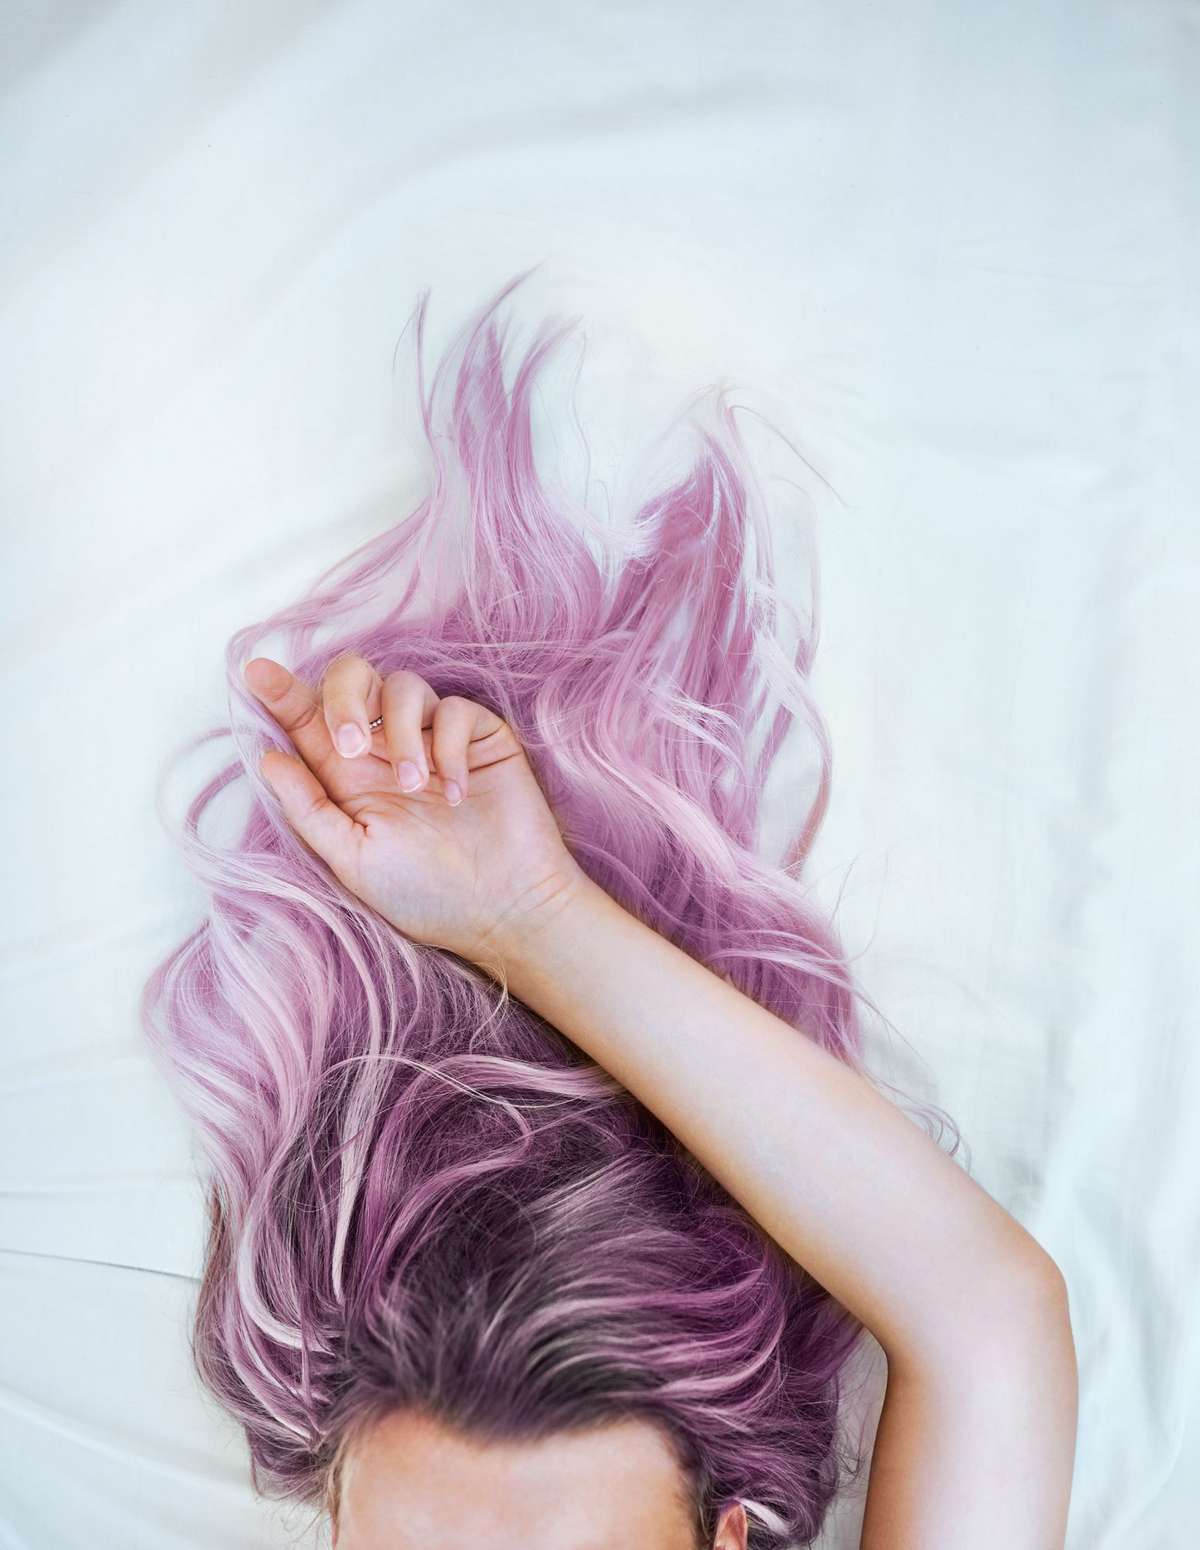 How Much Does it Cost to Dye Your Hair Pink?